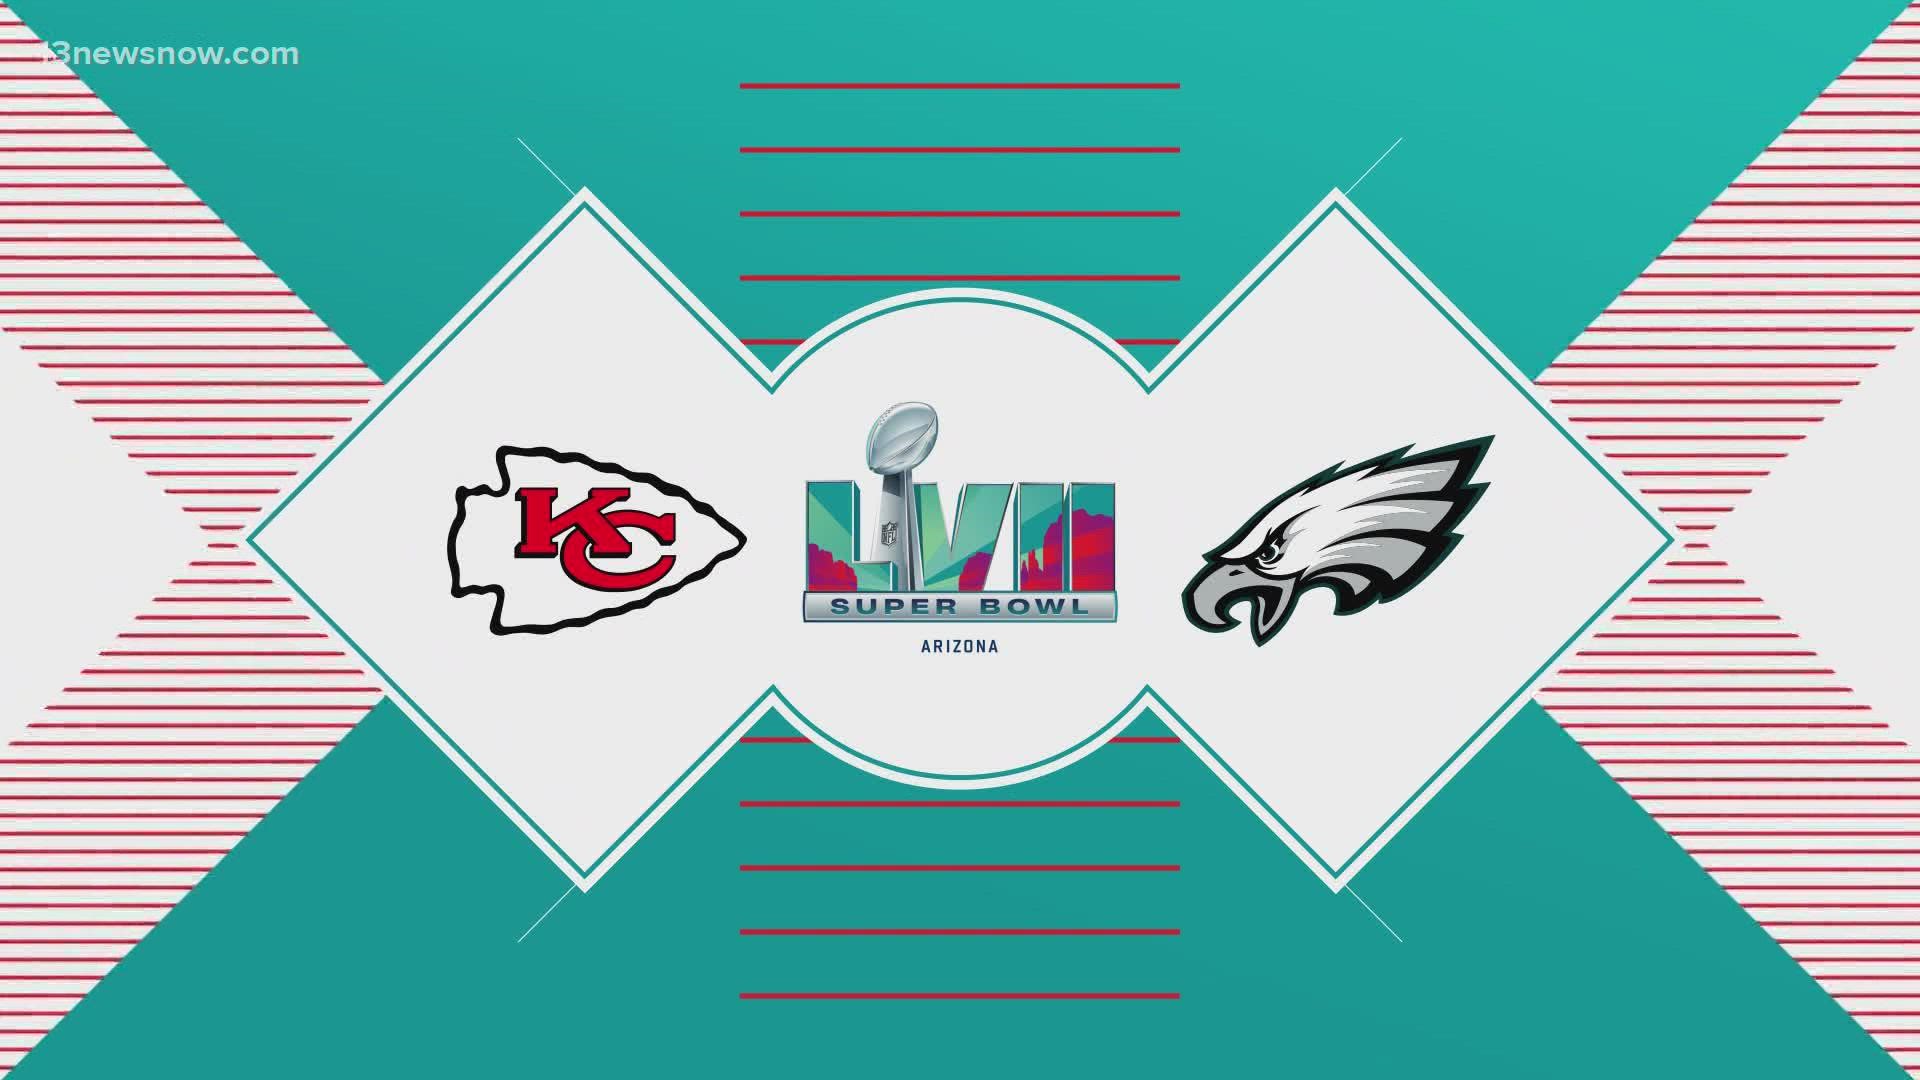 Super Bowl LVII is set: Here are the teamsnewsnow.com